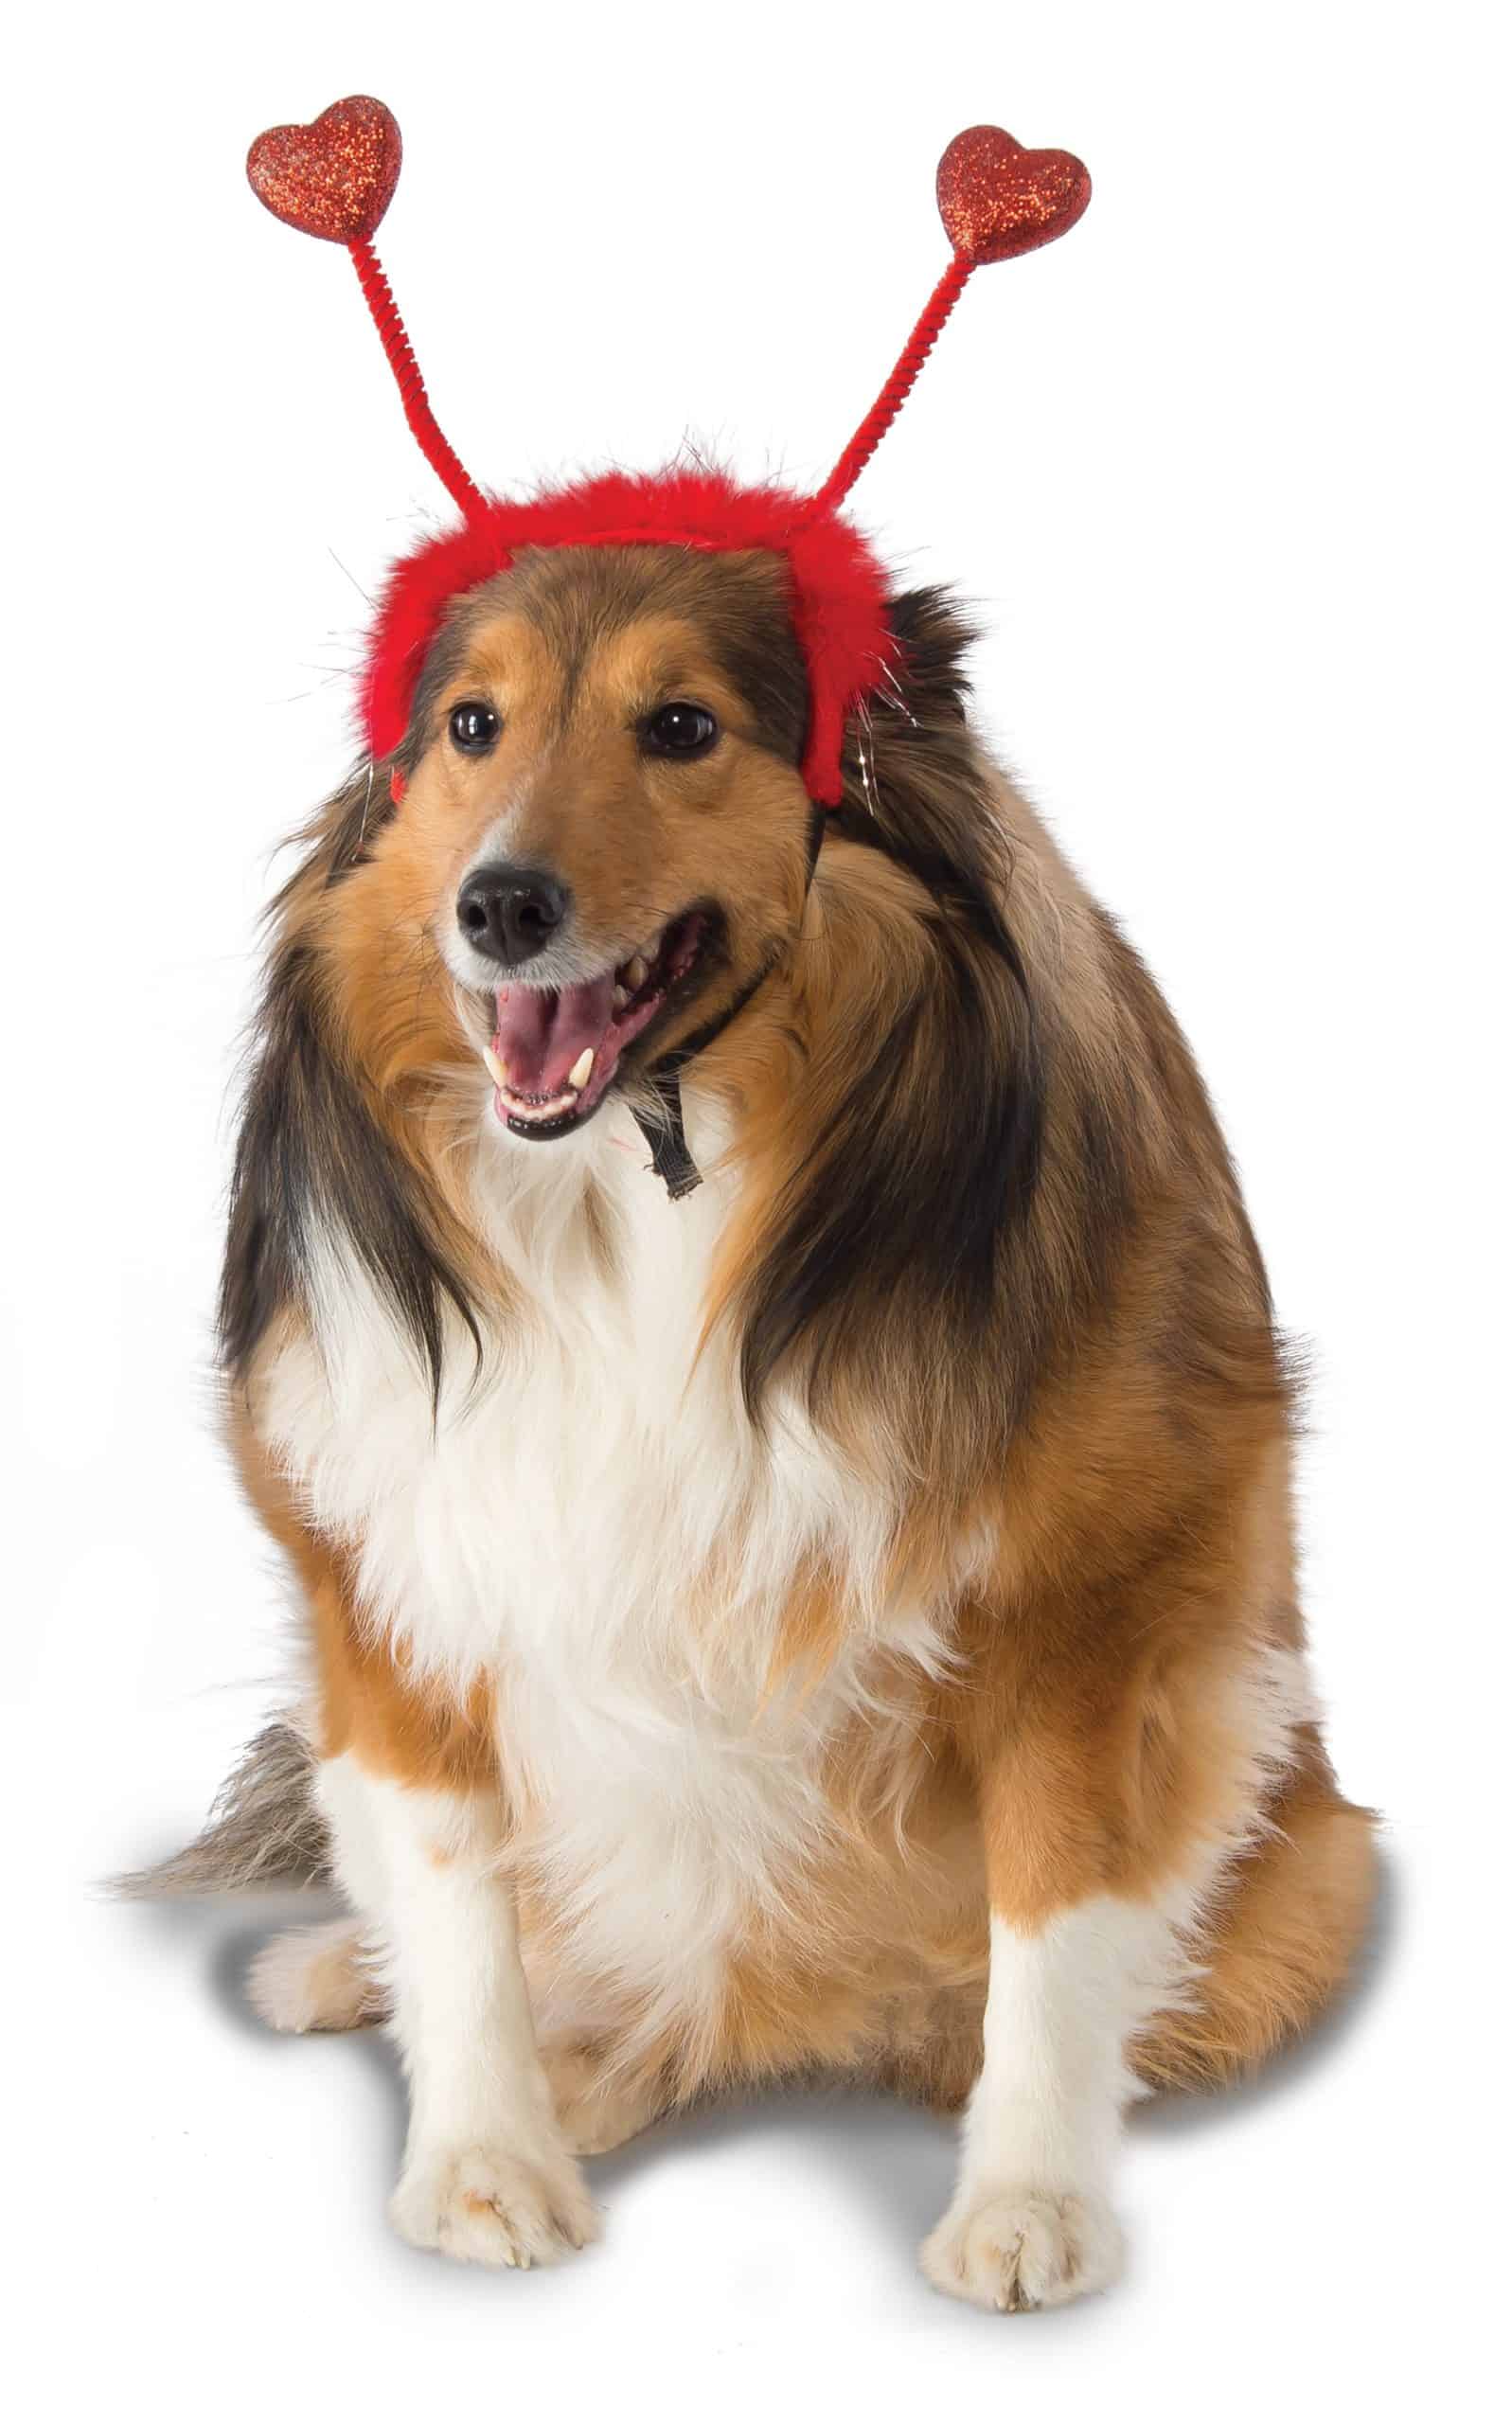 BWOGUE Valentines Day Dog Costume Red Love Hearts Dog Headband with Collar Holiday Birthday Party Headwear Costume Gift for Small Medium Dogs